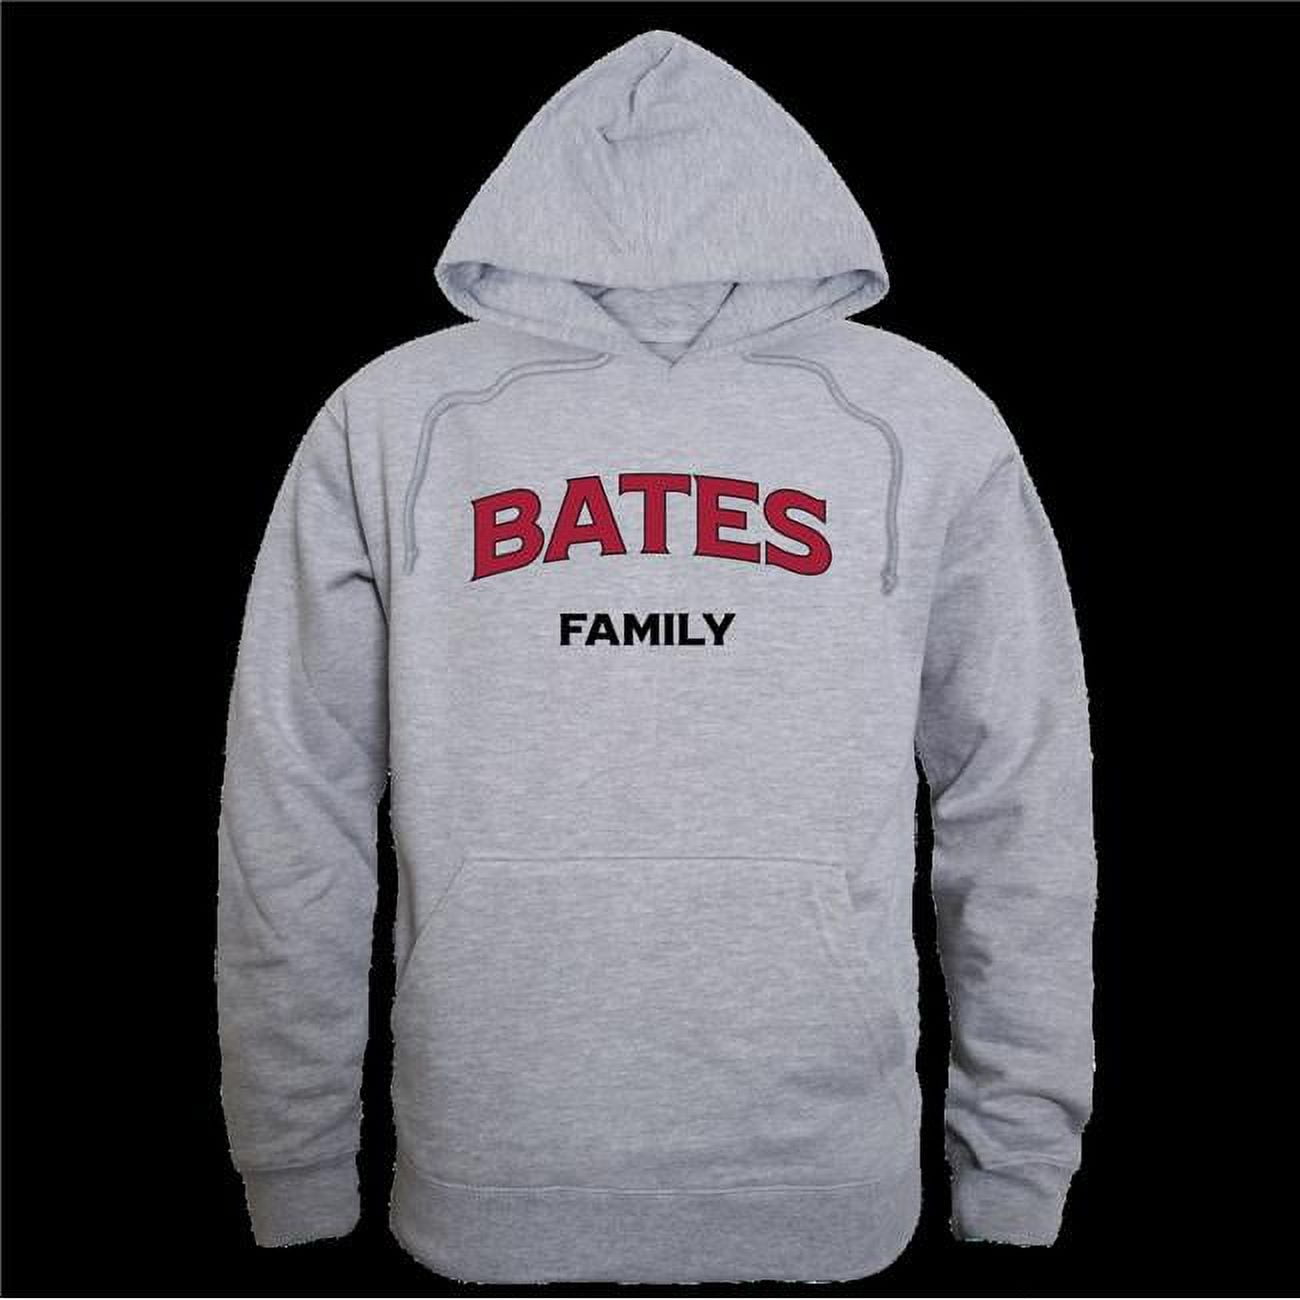 W Republic 573-615-WHT-04 Bates College Bobcats Family Hoodie, White -  Extra Large